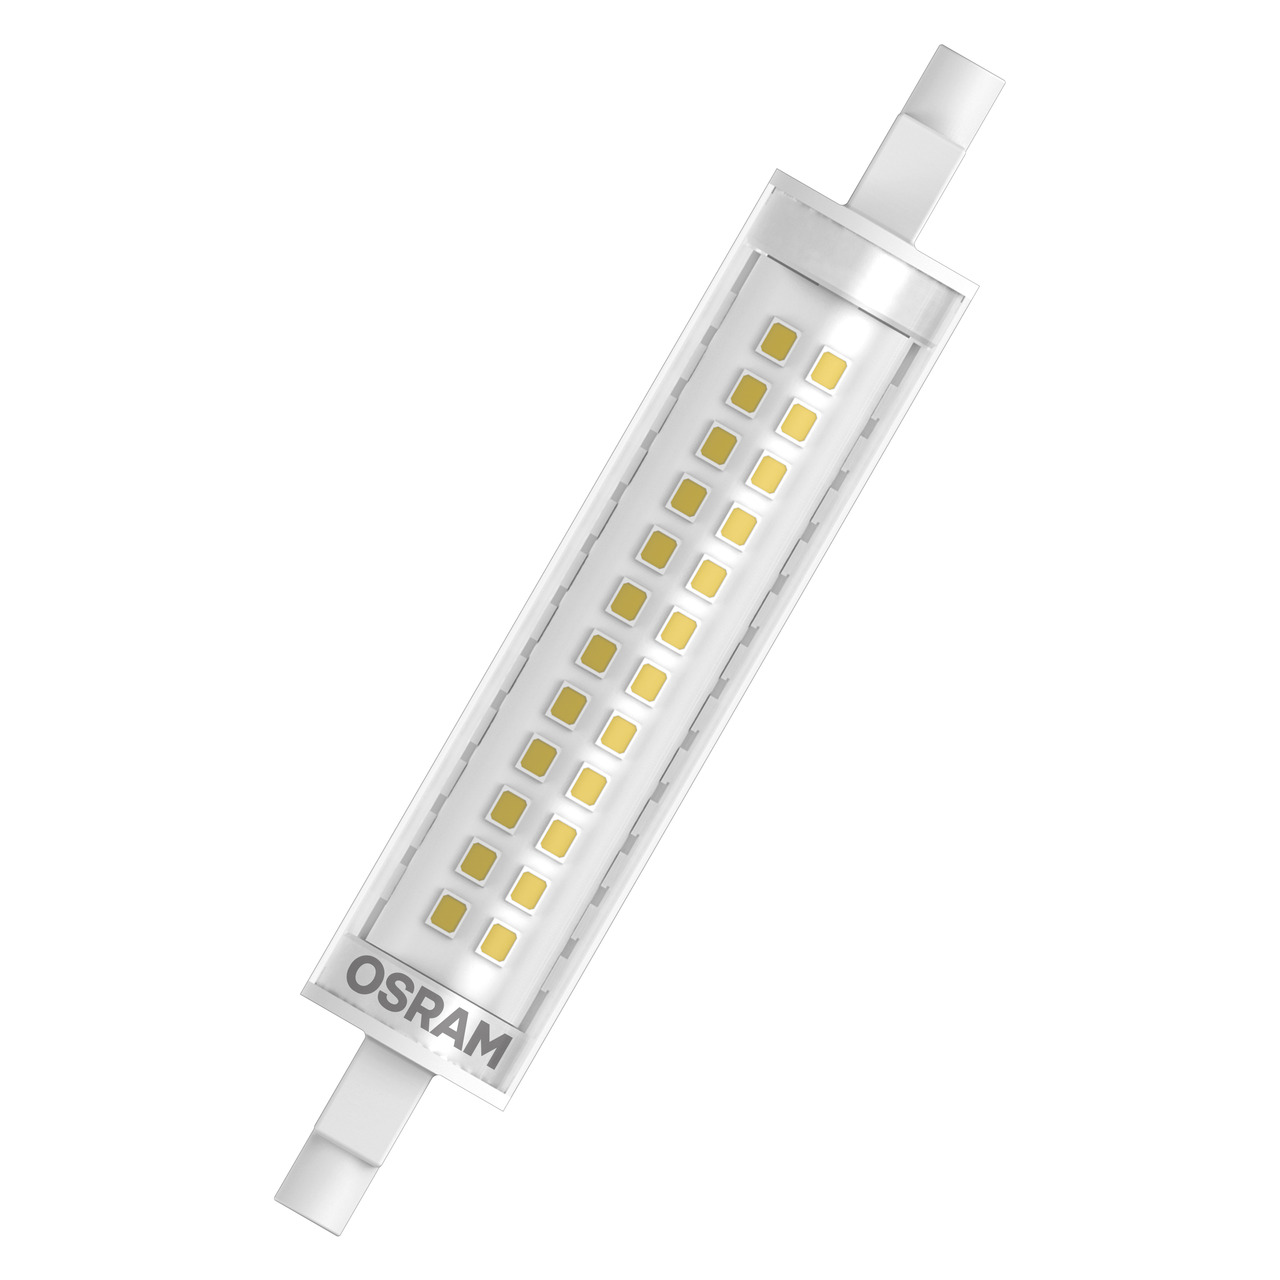 OSRAM 12-W-LED-Lampe T20- R7s- 1521 lm- warmweiss